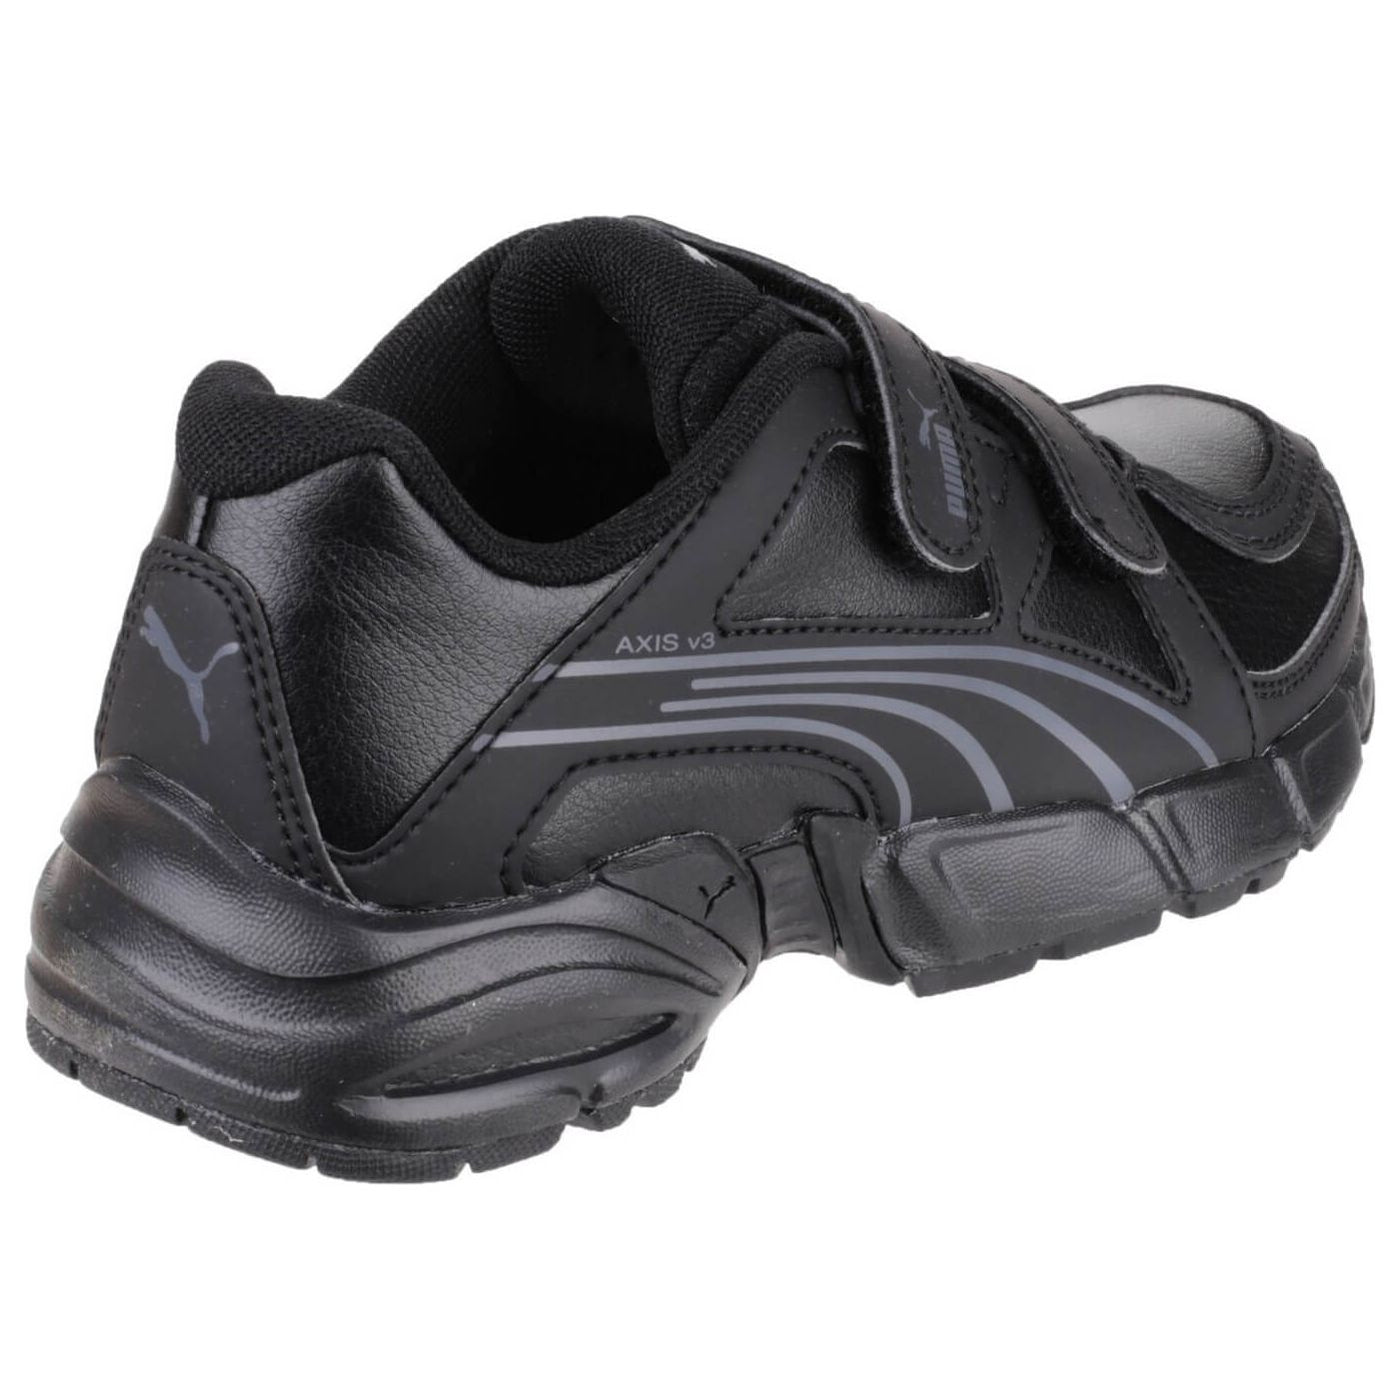 Puma Axis V3 Touch-Fastening Shoes-Black-2